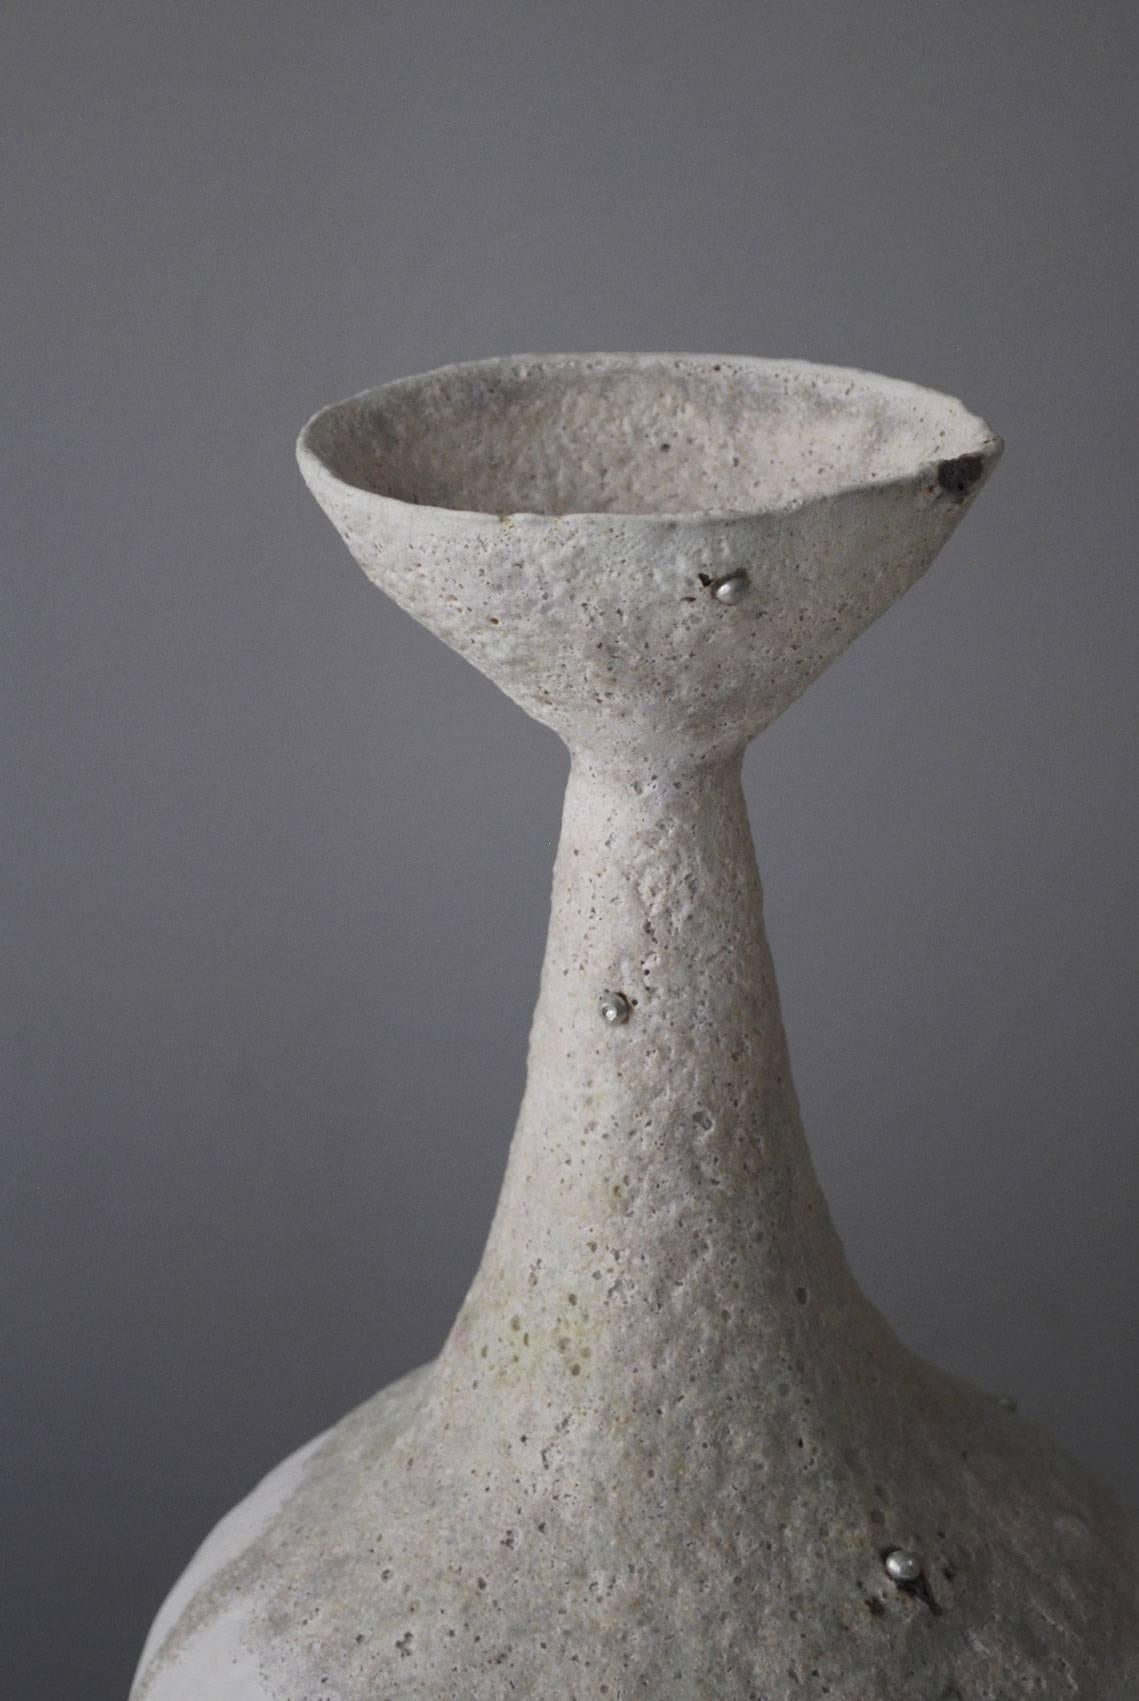 Unique vase by Alana Wilson
Purity / 3017 (Ritual)
Terracotta with porcelain slip, stoneware glazes, fusible metall alloy
Measures: 39 x 20 x 20cm

 Alana Wilson's work explores both primitive and contemporary aesthetics and techniques in order